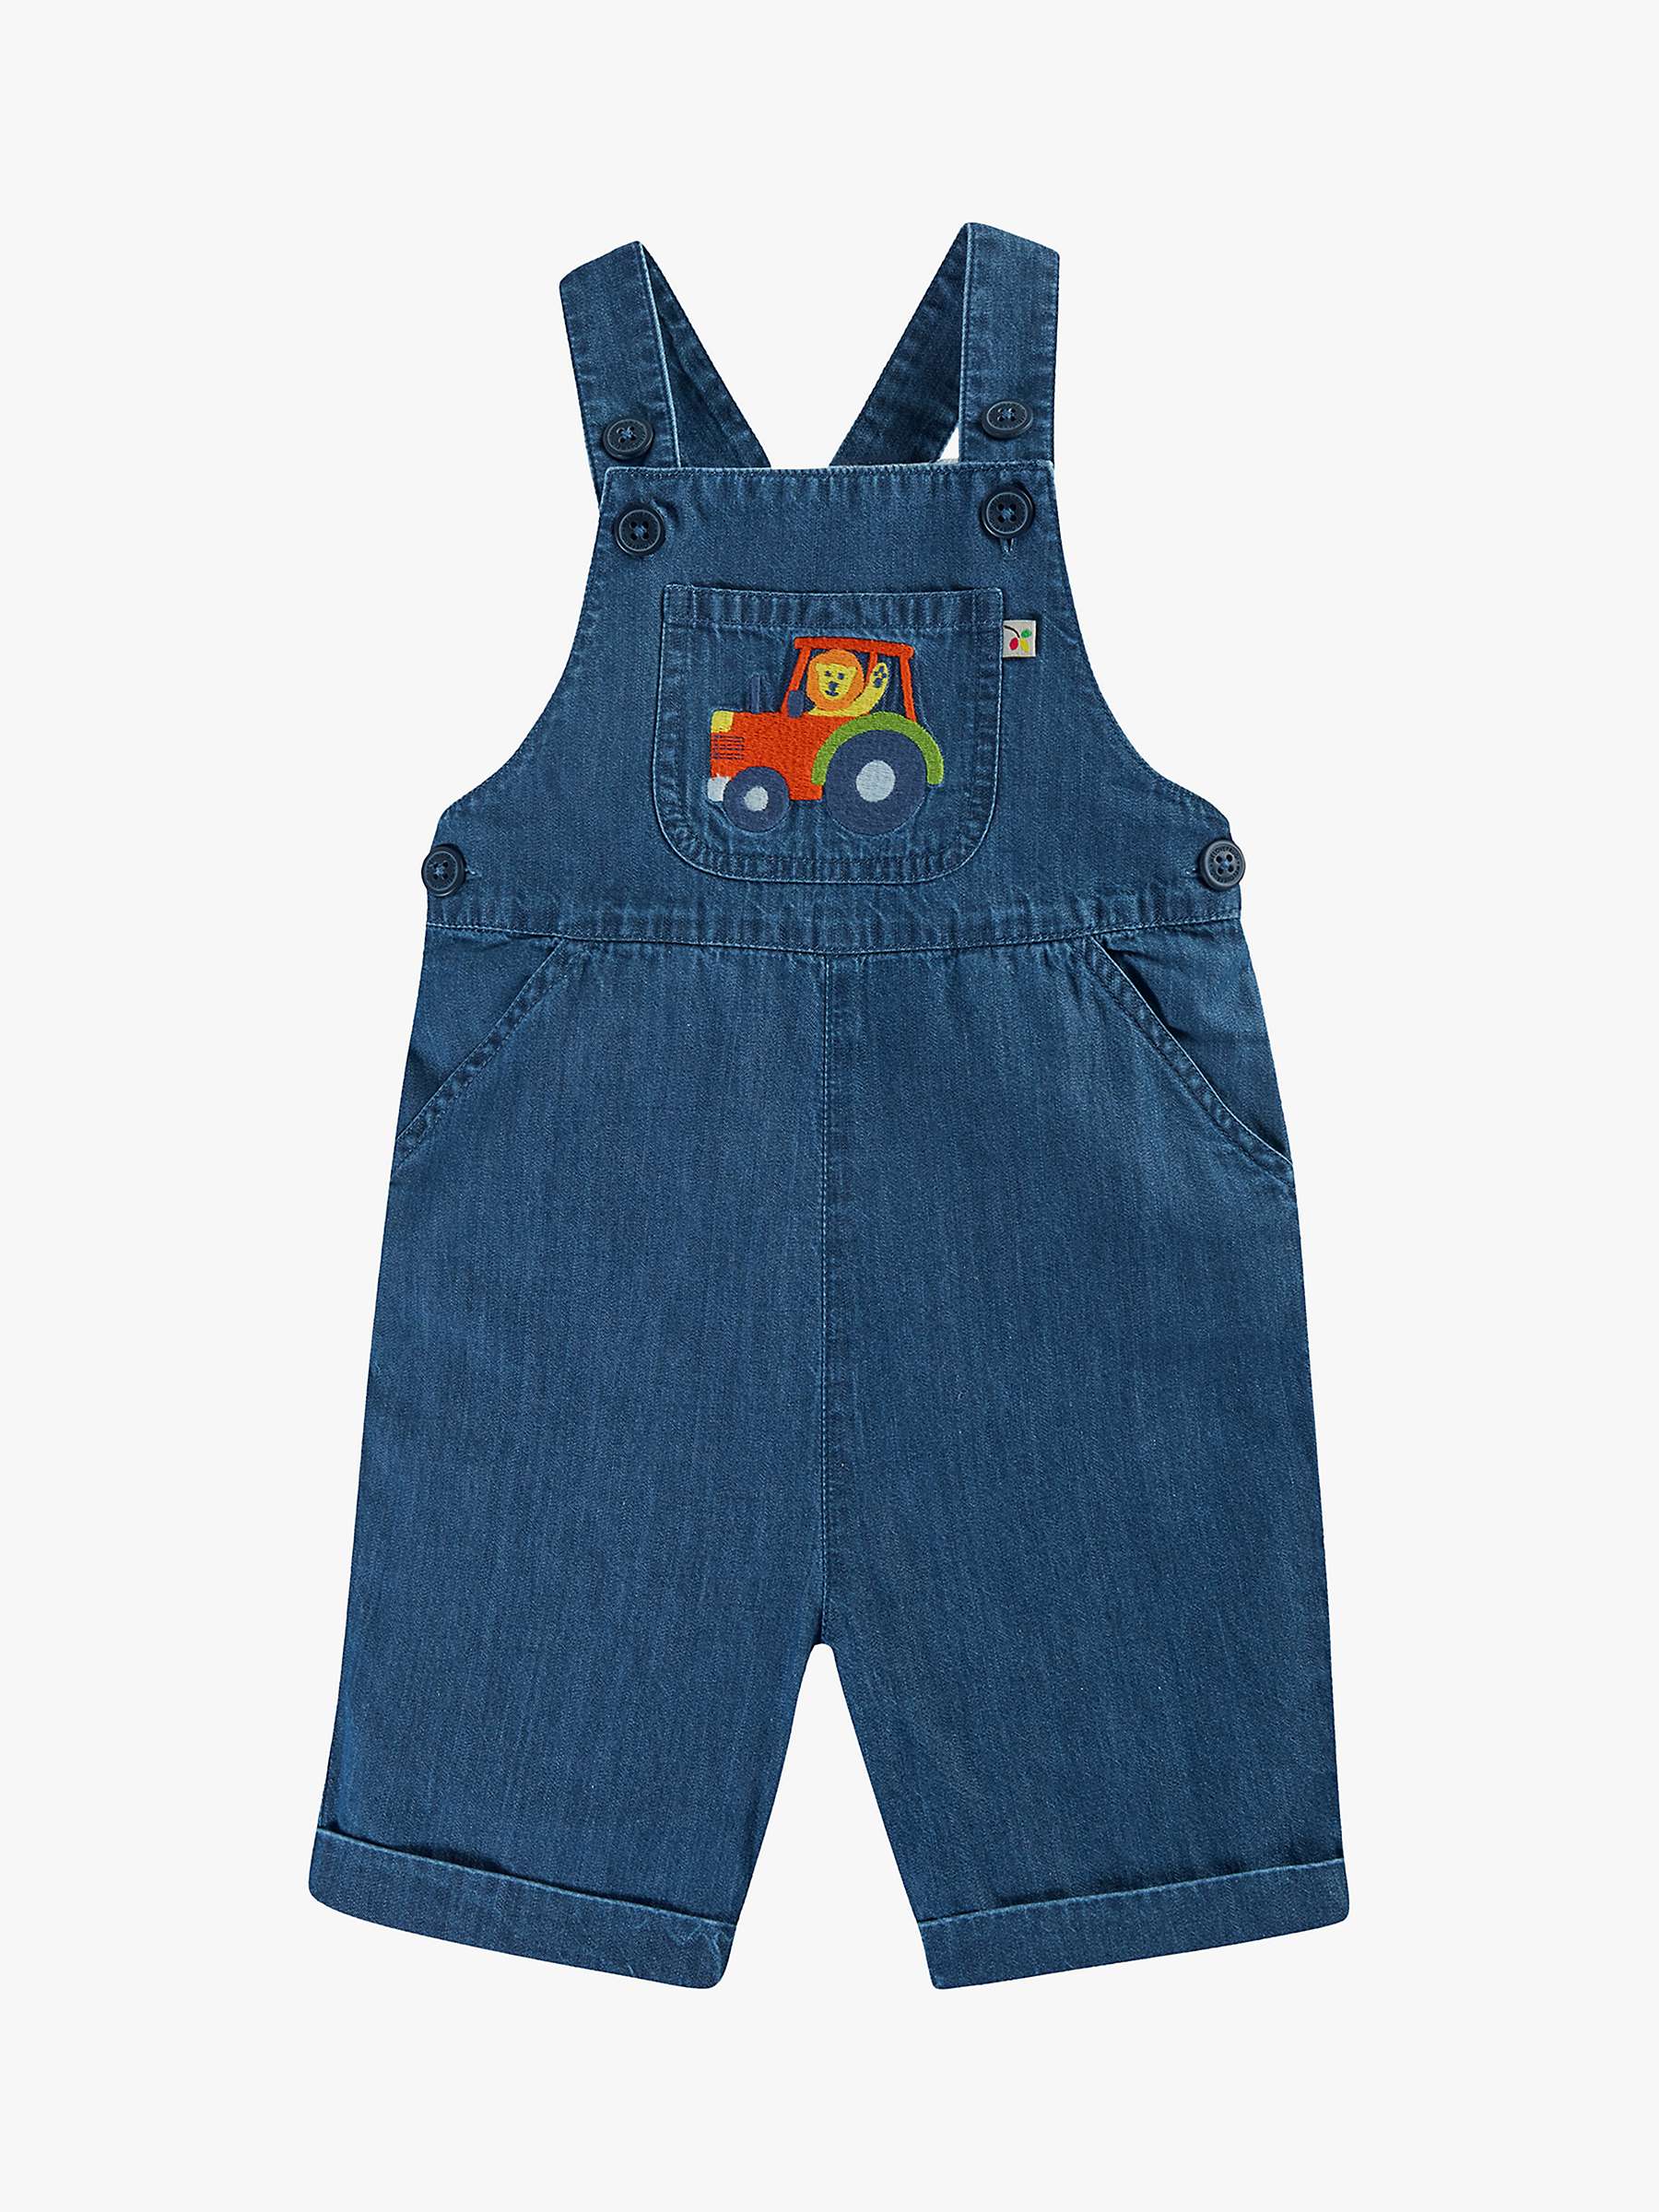 Buy Frugi Baby Carnkie Organic Cotton Tractor Dungarees, Chambray/Multi Online at johnlewis.com